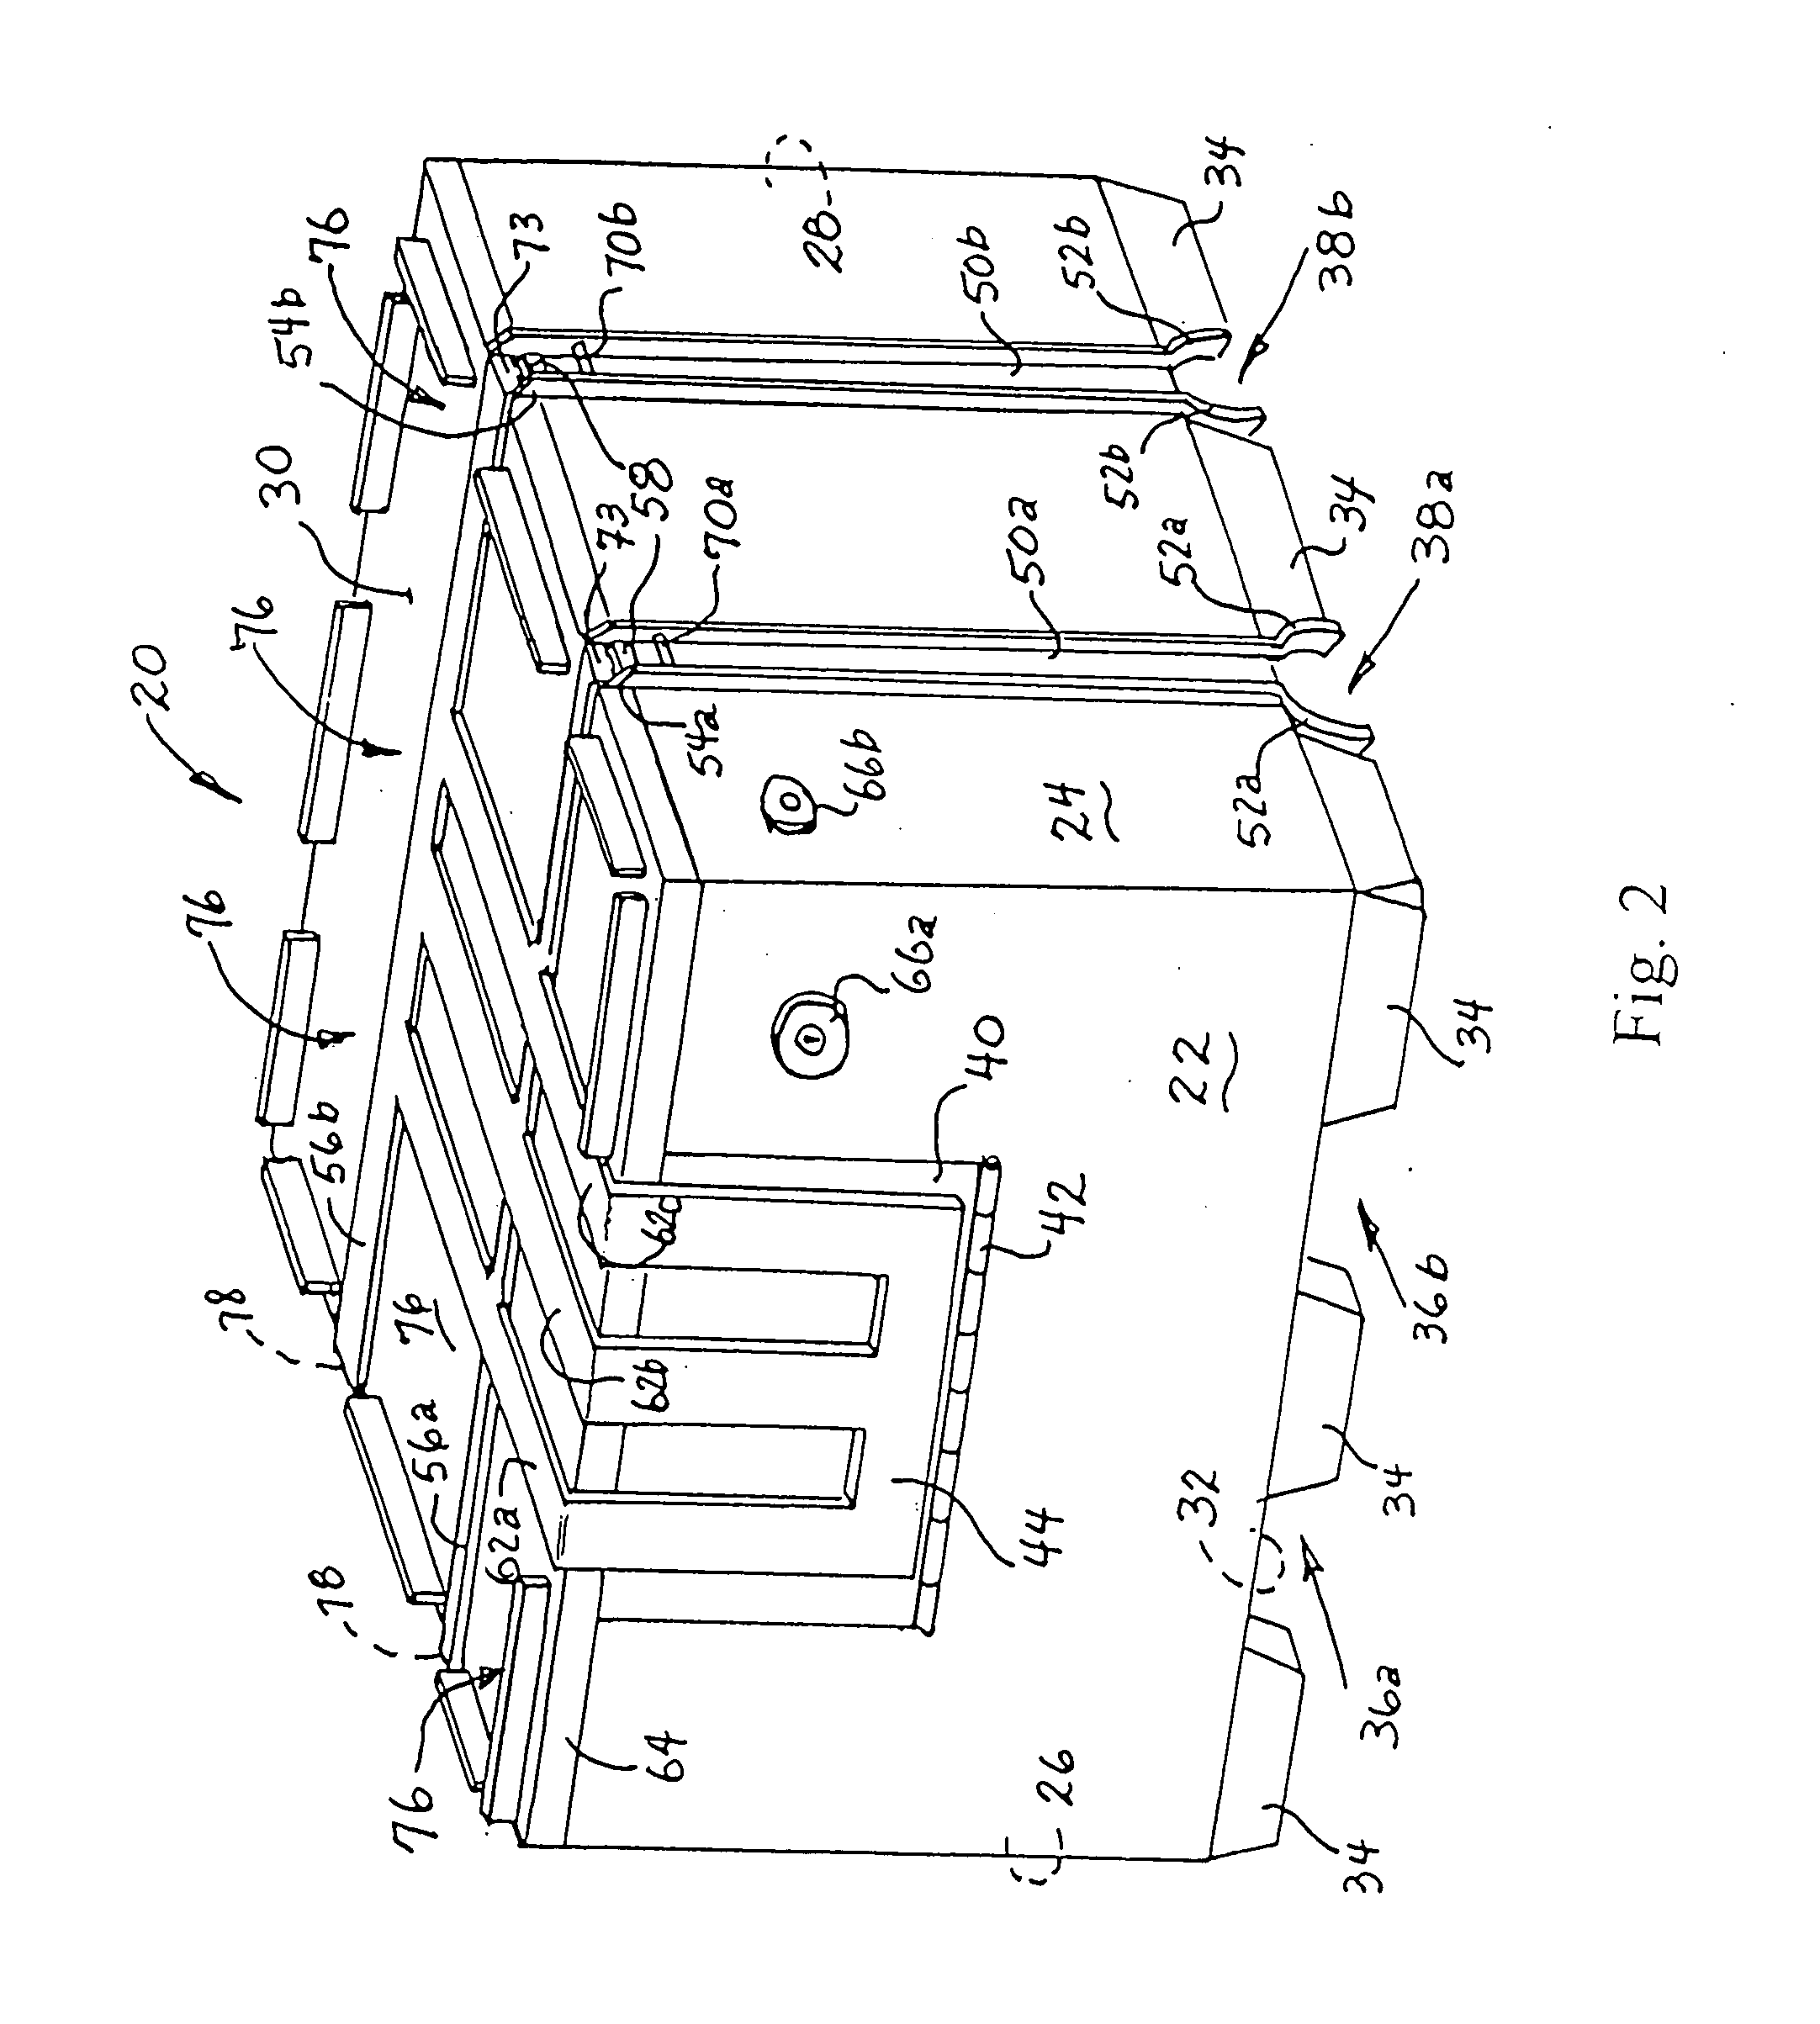 Private pallet-box cargo shipping system